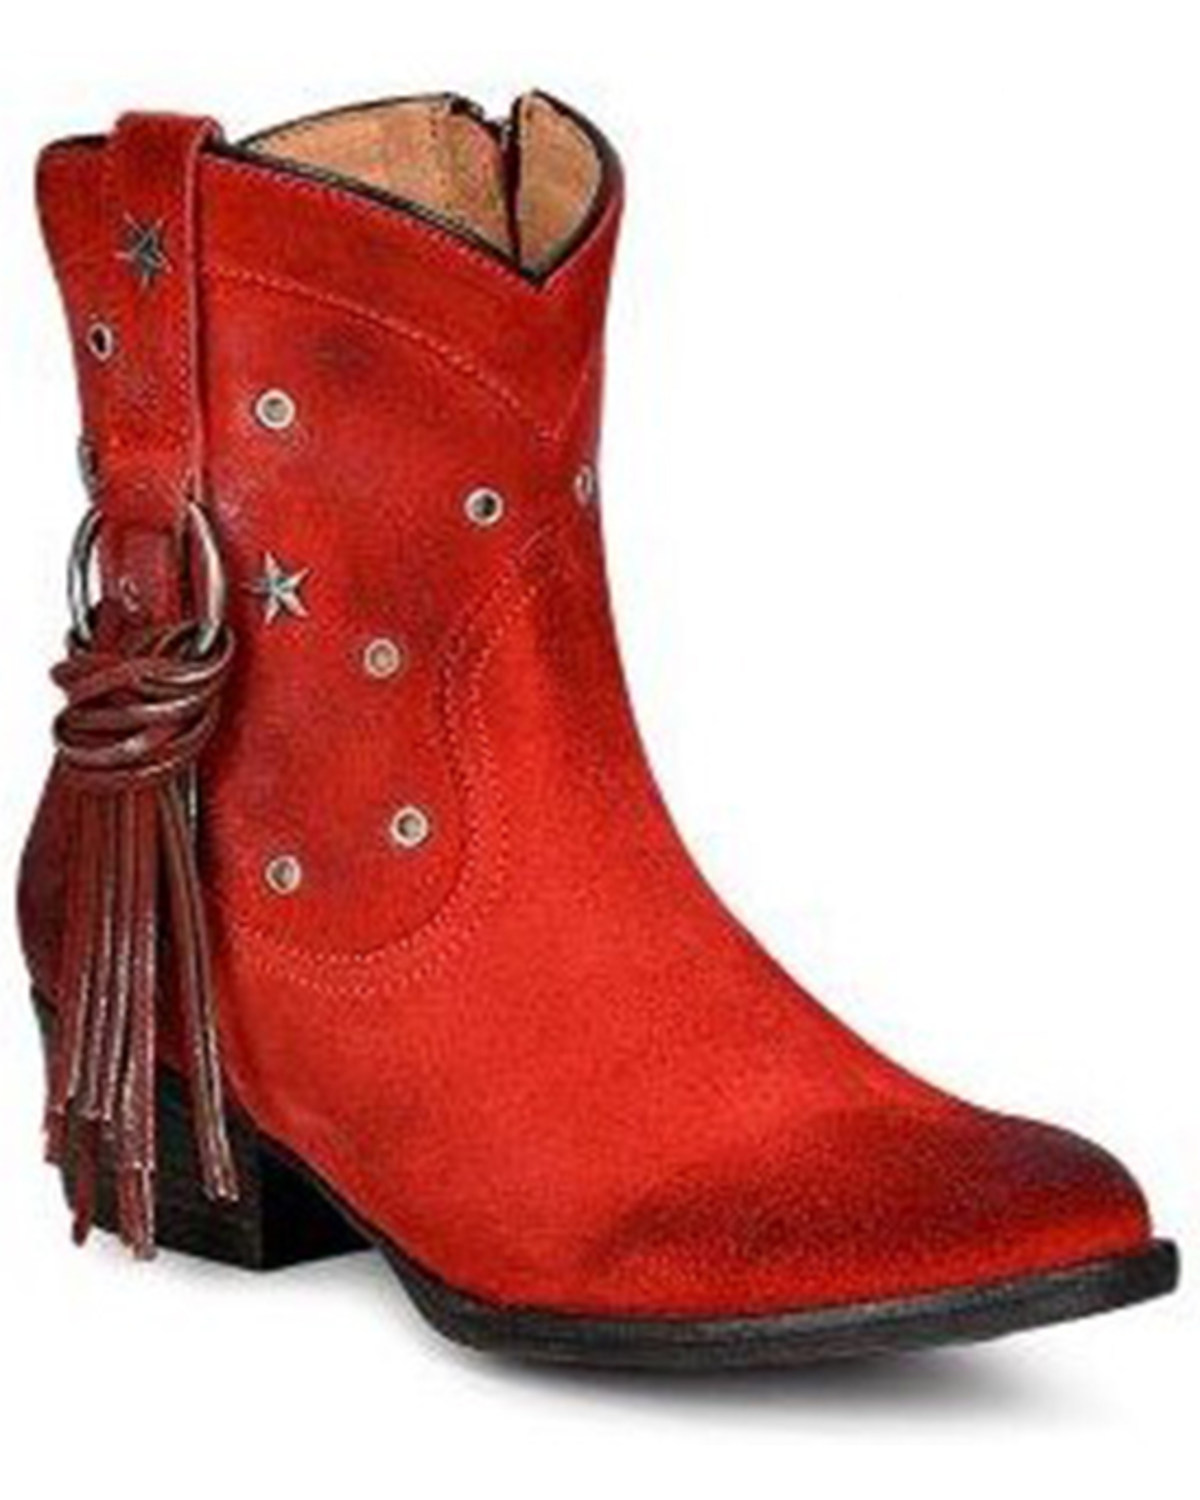 Corral Women's Fringe Harness & Star Studded Booties - Round Toe